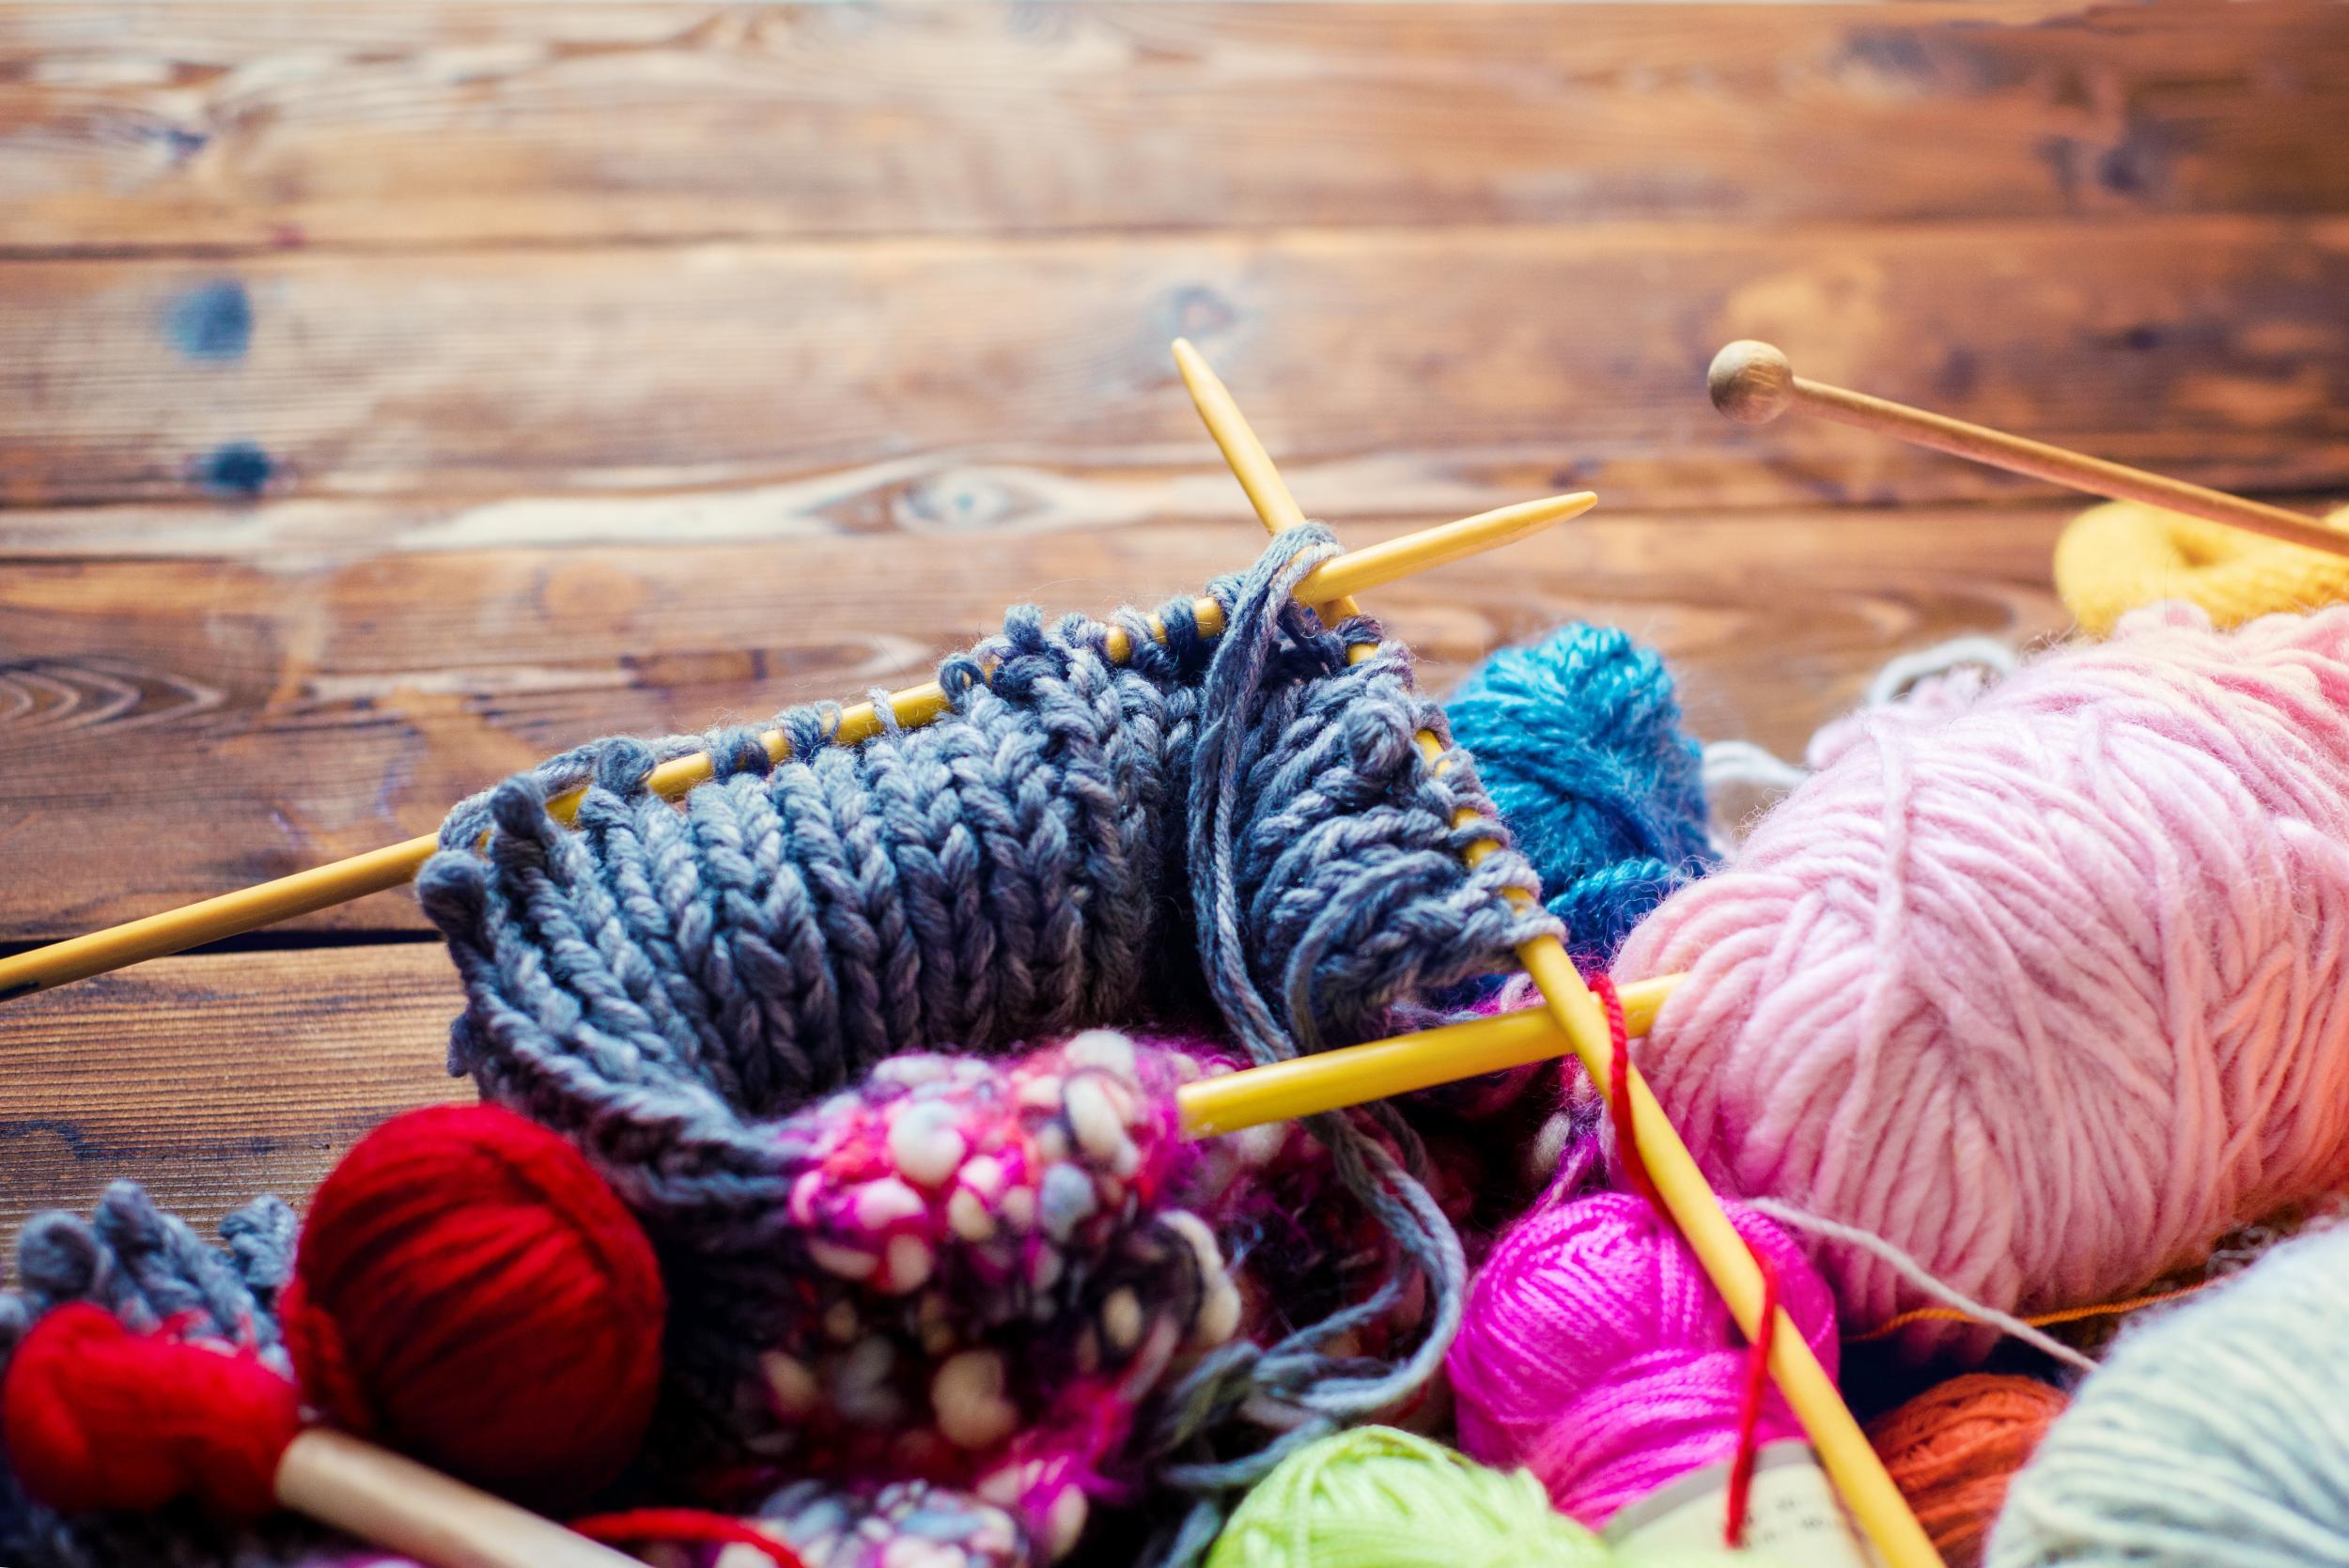 Stop Crochet Pain and Knitting Strain with Yoga for Knitters